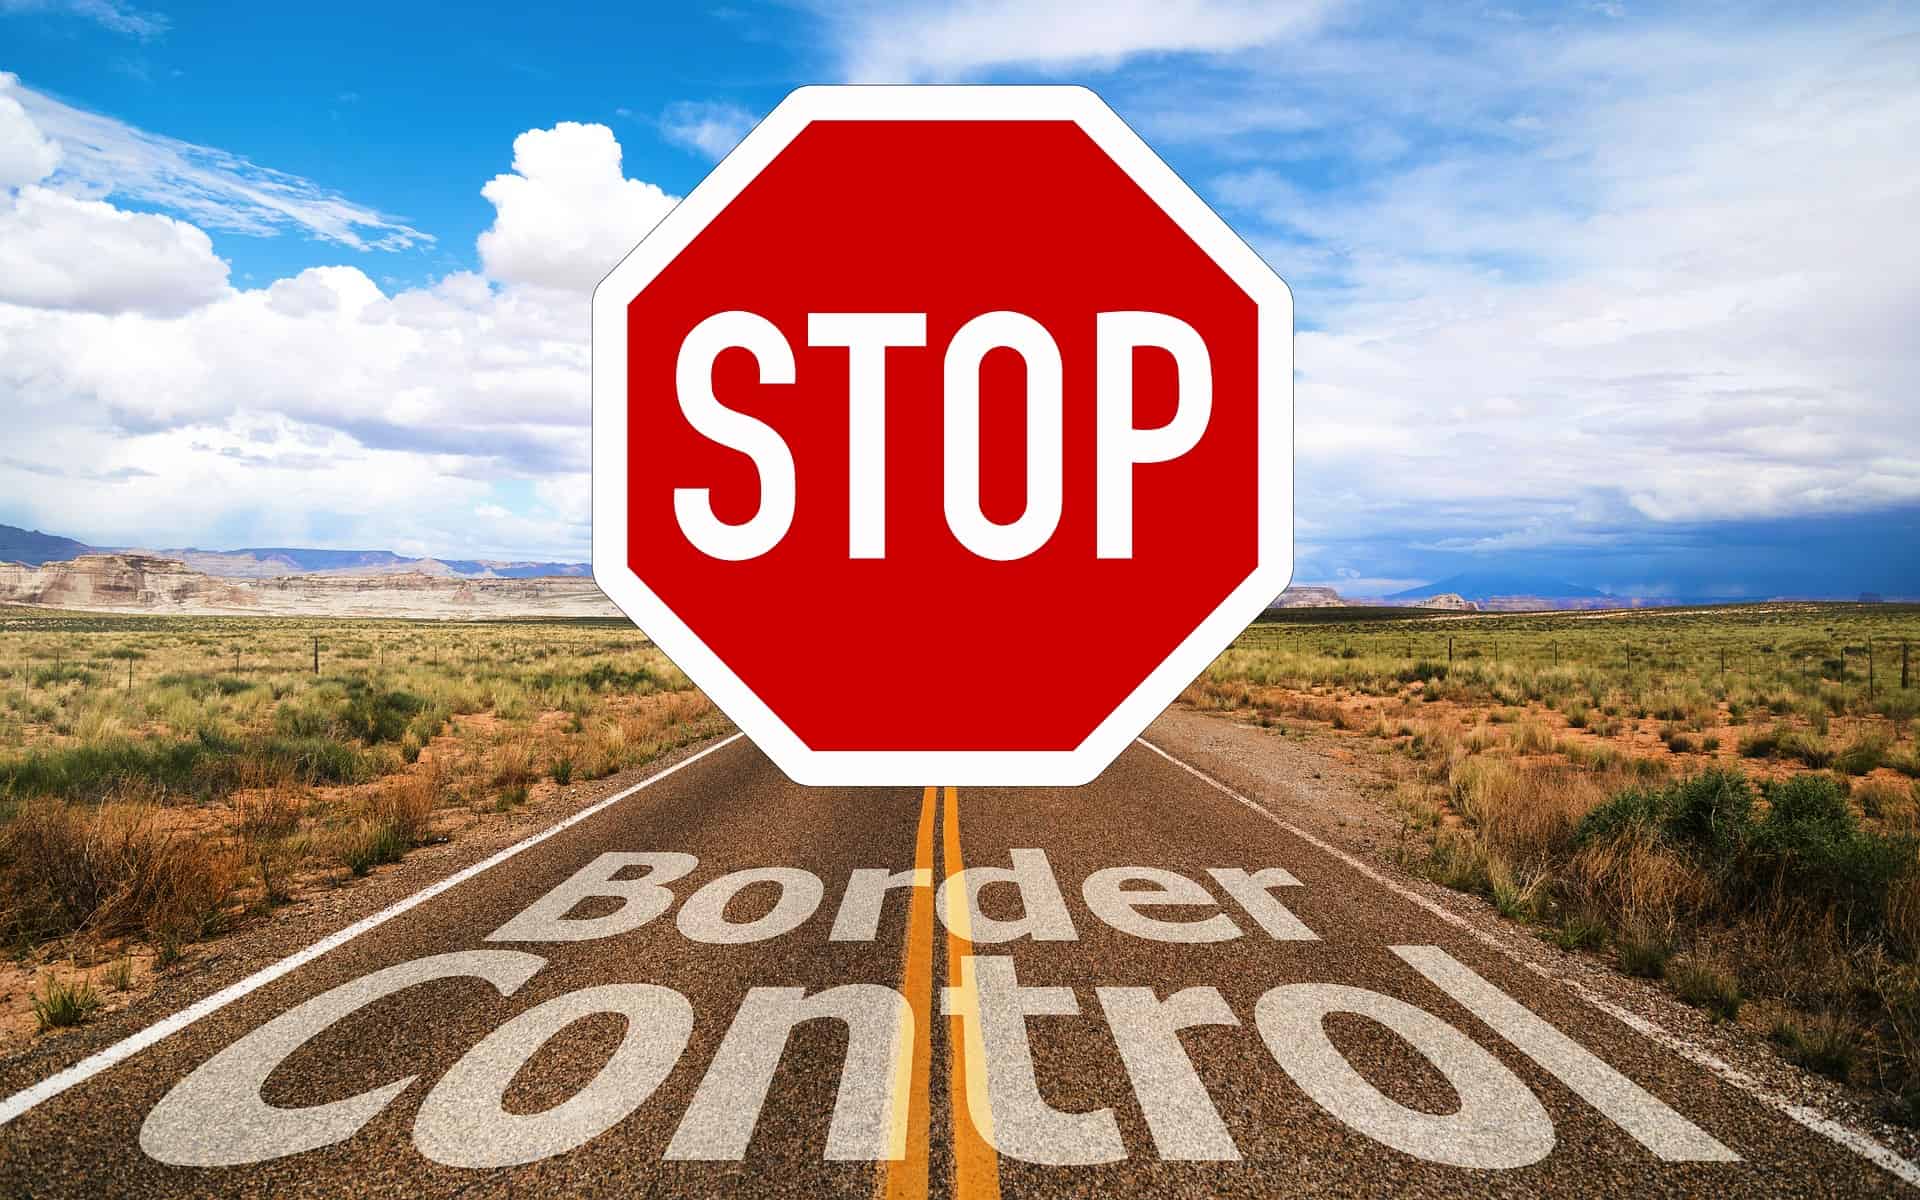 Schengen Visa First Port of Entry: What Are the Rules? > Visas